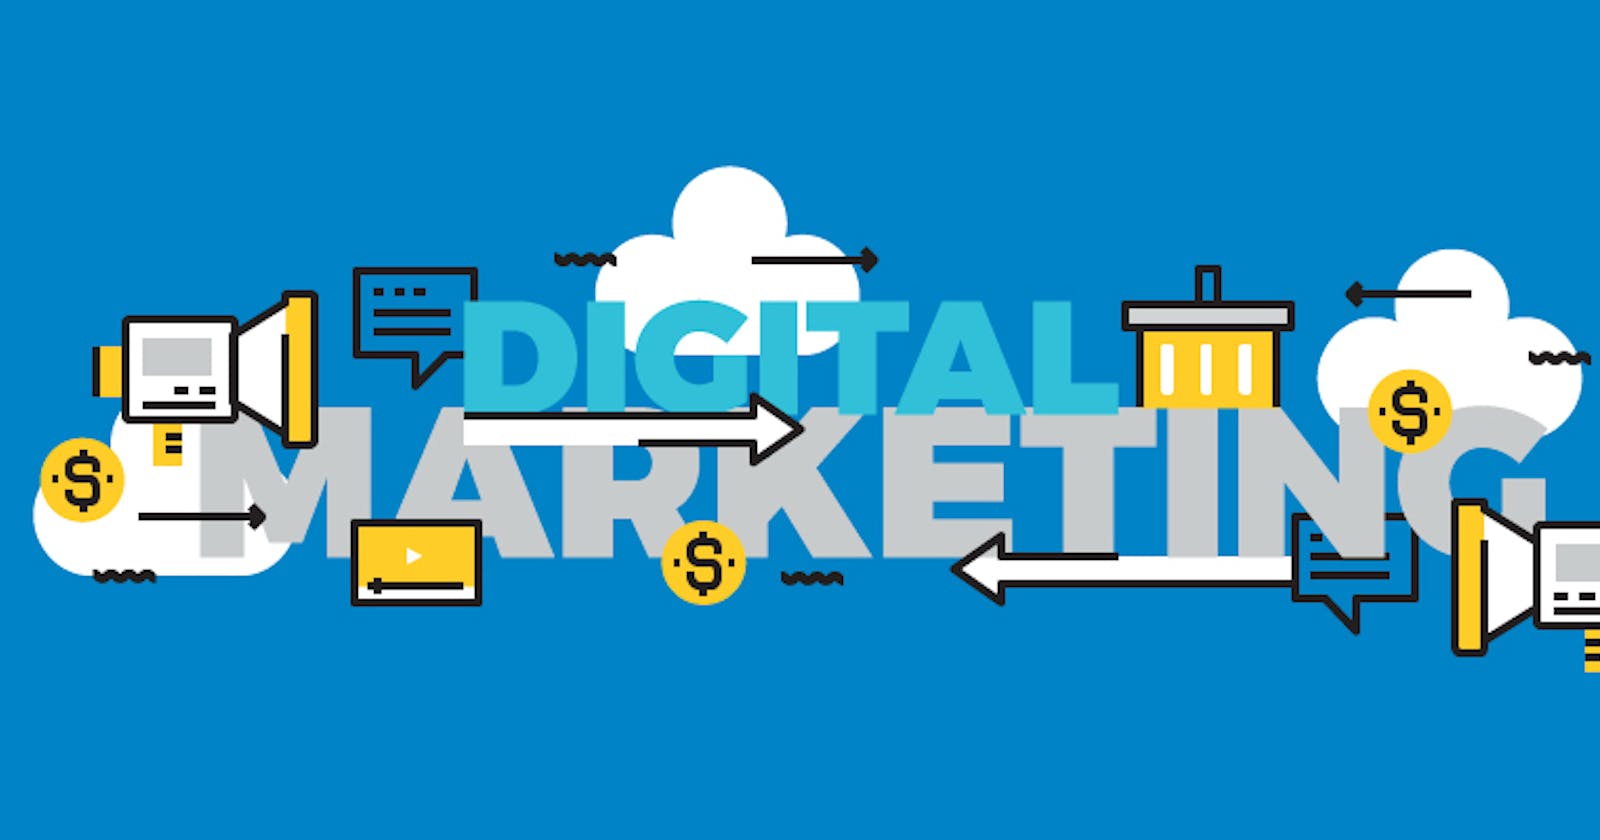 Top 3 Digital Marketing Trends You Should Know